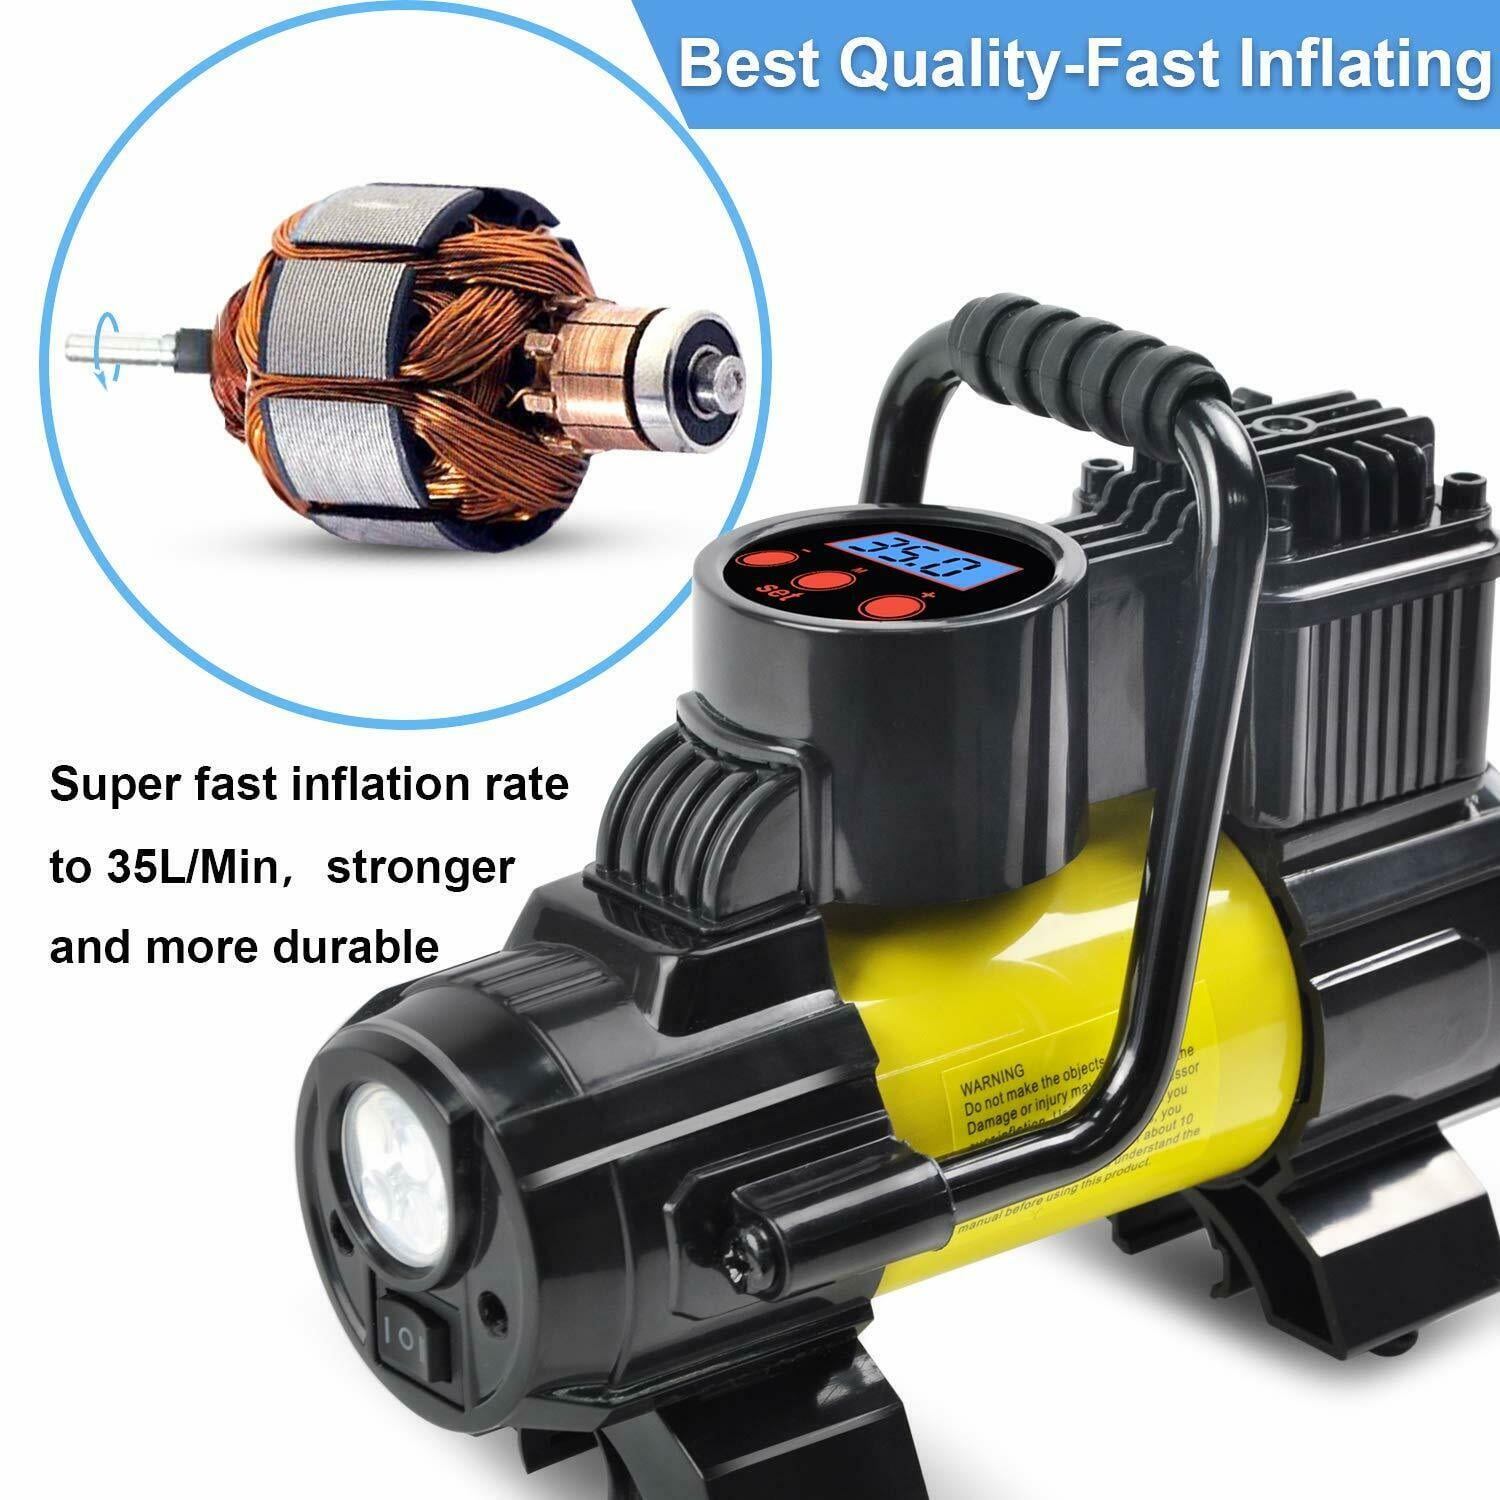 HEAVY DUTY PORTABLE 12V ELECTRIC TYRE INFLATOR 150PSI AIR COMPRESSOR PUMP 